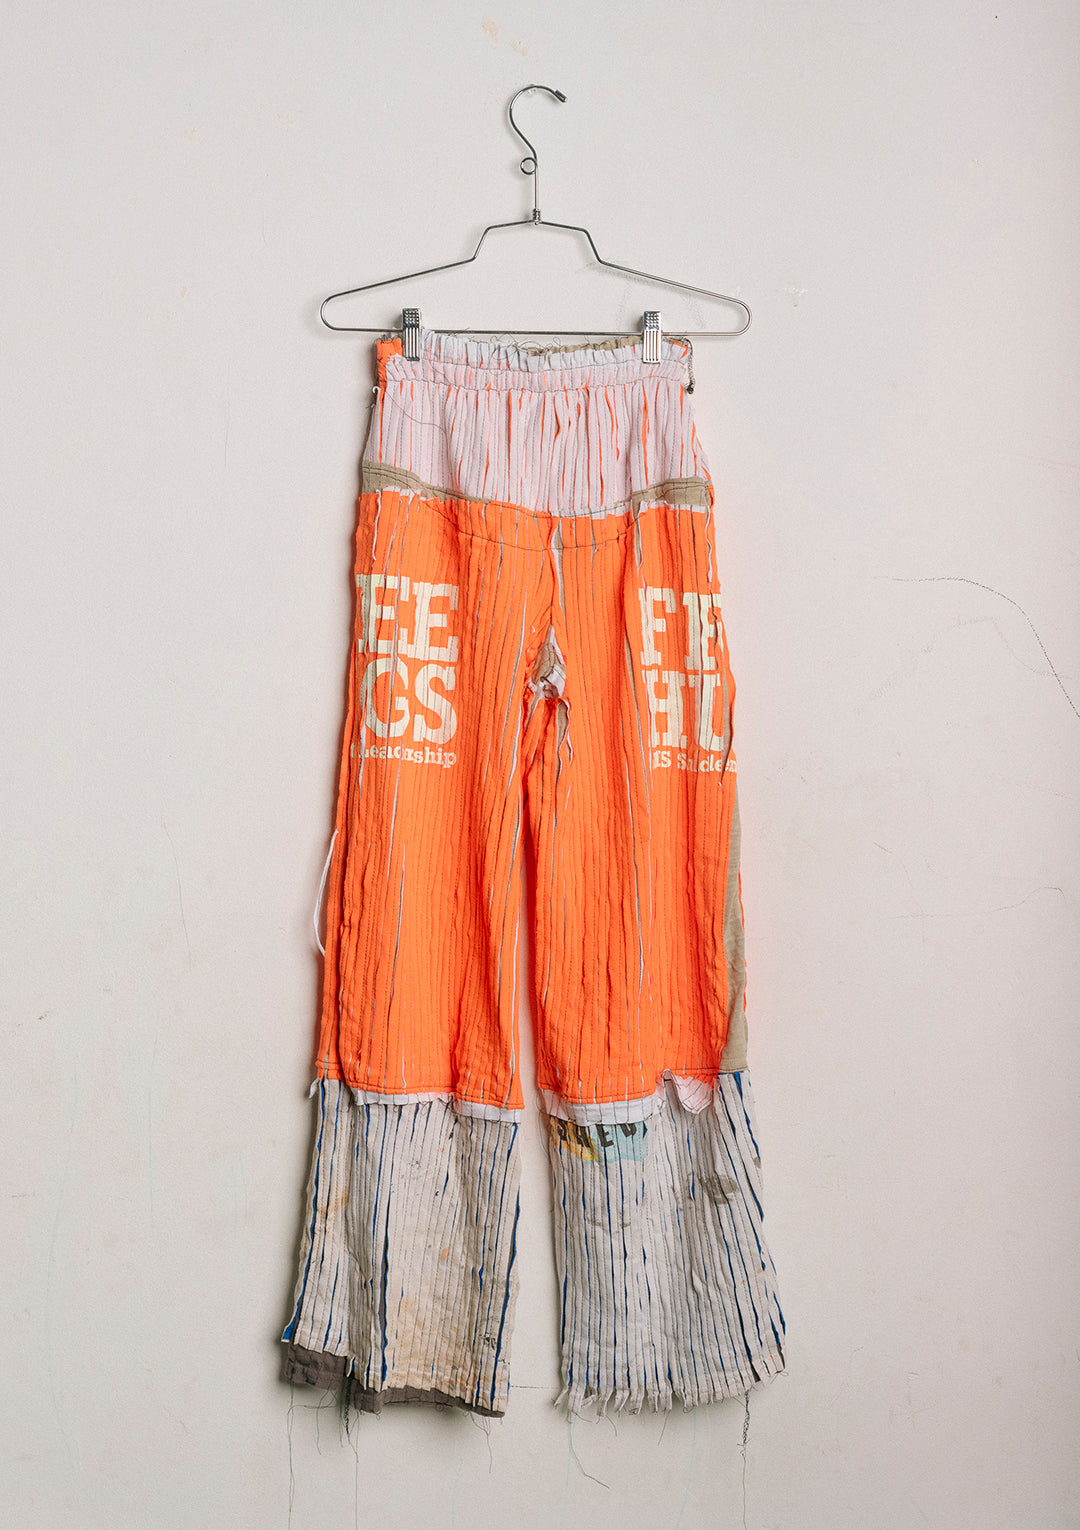 3T Pants (White, Orange and Dirty White)